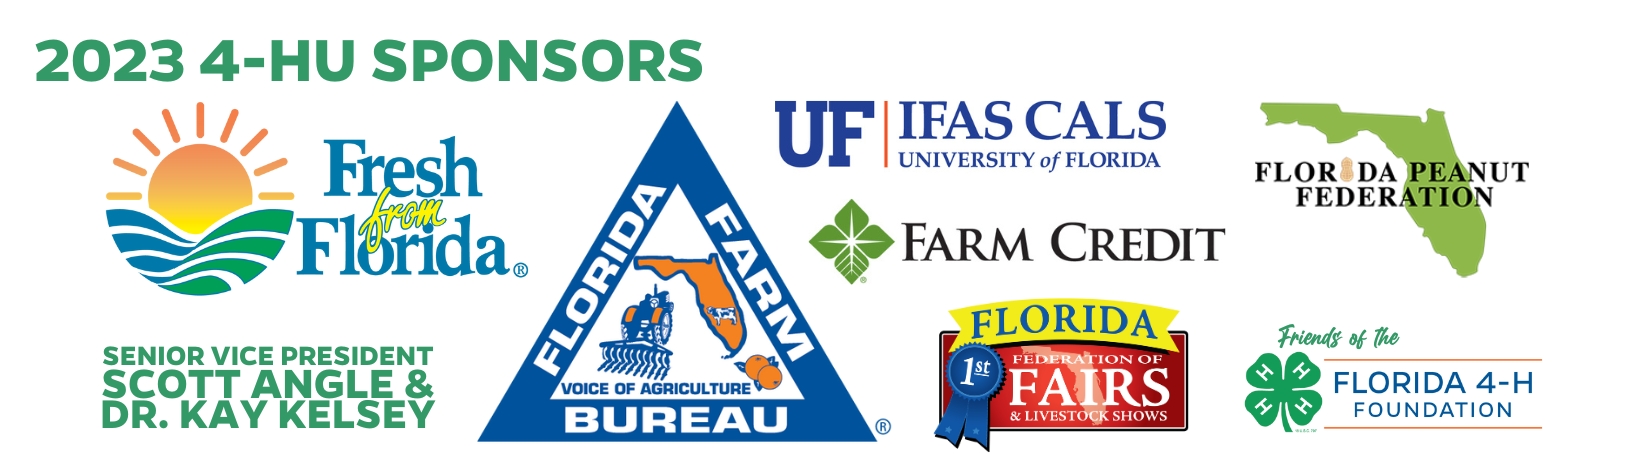 Thank You to 2022 4-HU Sponsors - Florida Farm Bureau, Fresh From Florida, UF/IFAS CALS, Farm Credit, Florida Federation of Fairs, Florida Peanut Federation, LLW (Lewis, Longman, Walker), Senior Vice President Scott Angle and Dr. Kay Kelsey, and Friends of the Florida 4-H Foundation